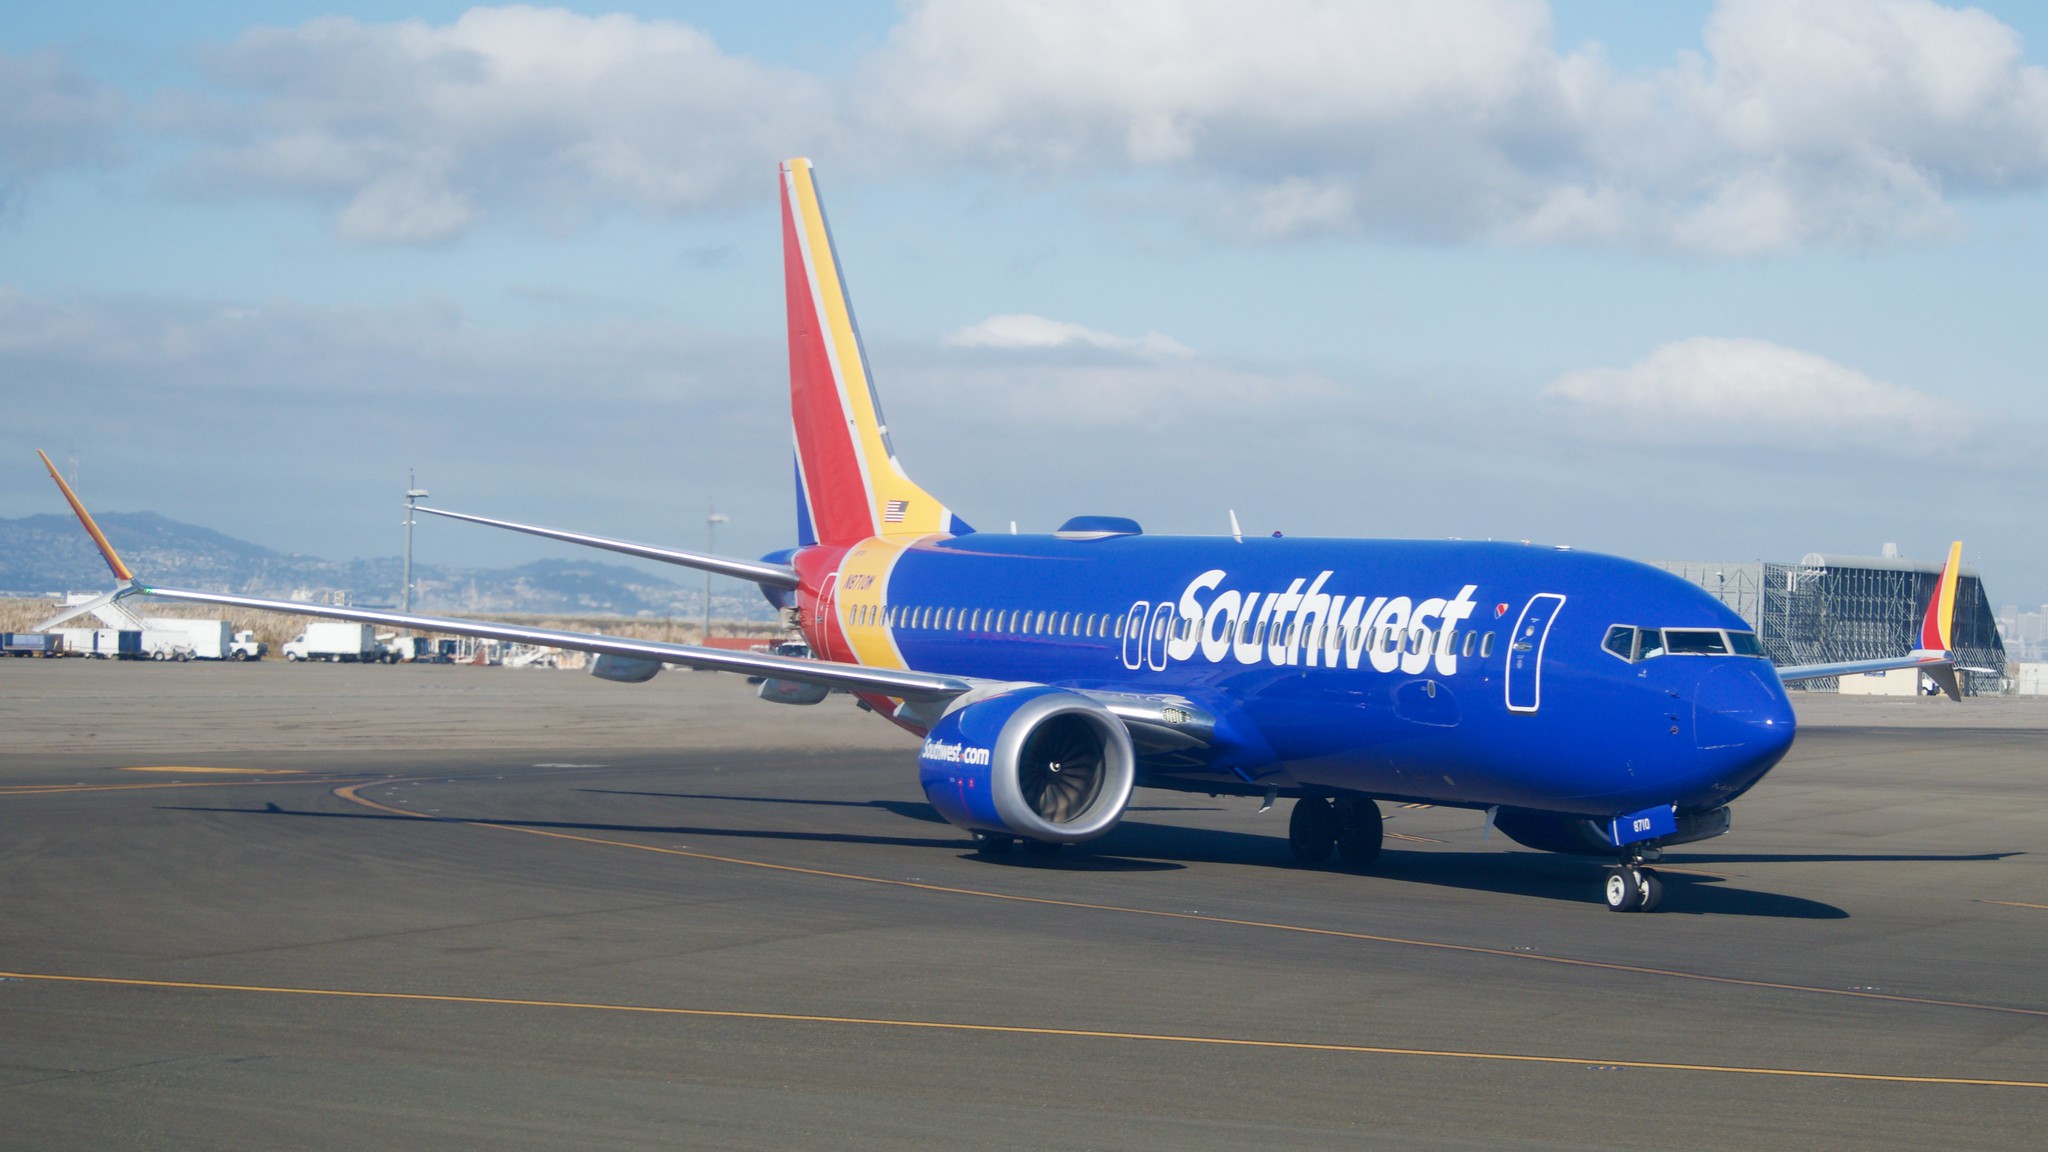 Southwest’s ‘Fatties Fly Free’ policy burdens others with higher costs